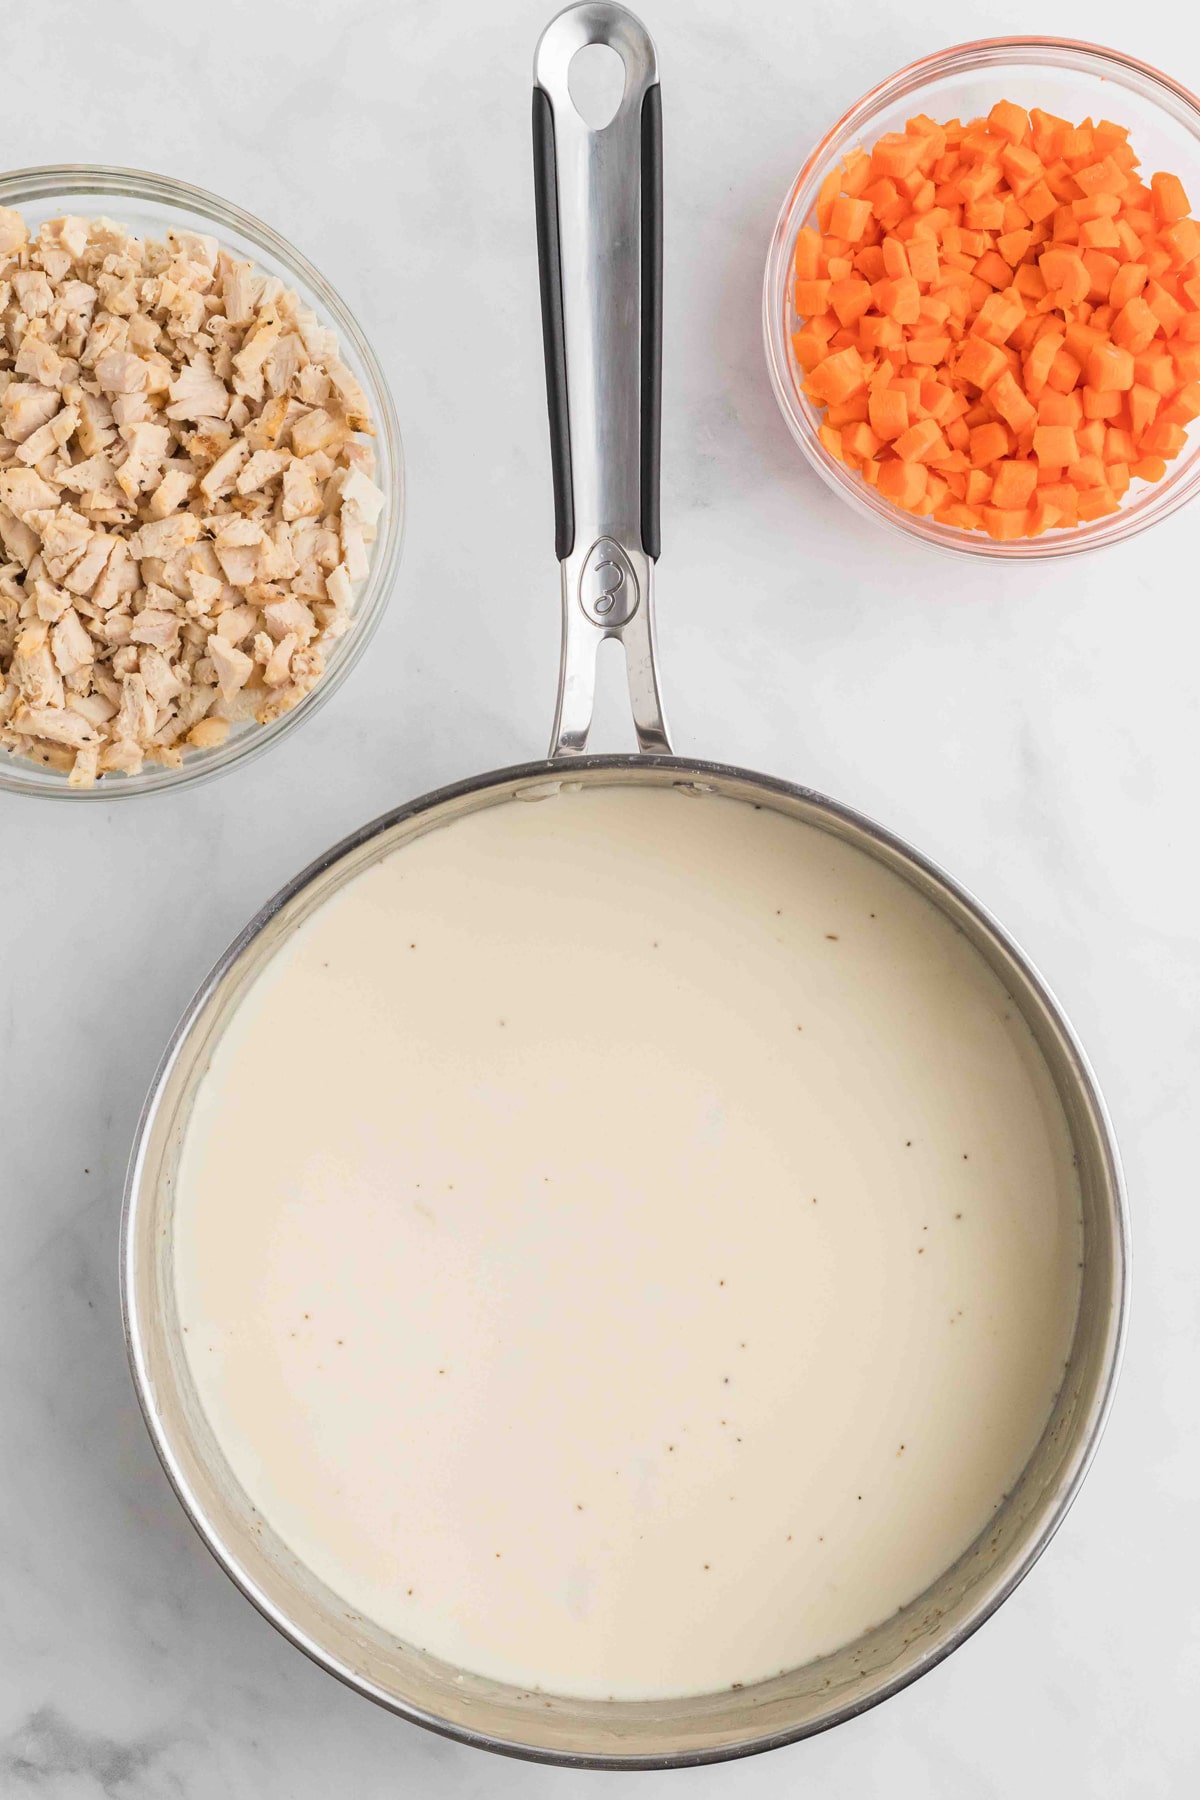 Creamy sauce in a skillet